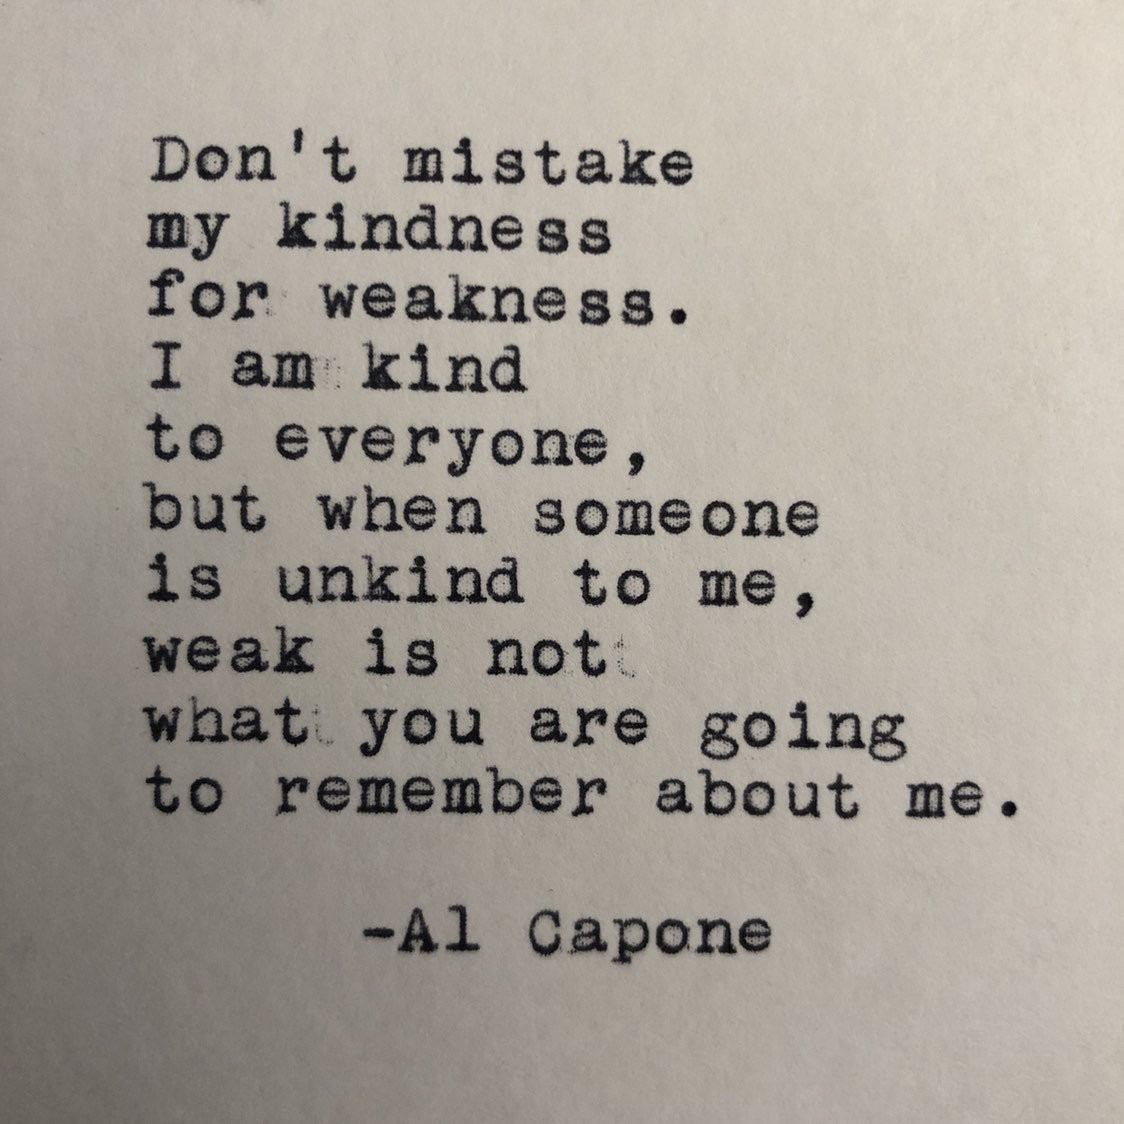 Al Capone Quote Kindness
 Al Capone Kindness Quote Typed on Typewriter